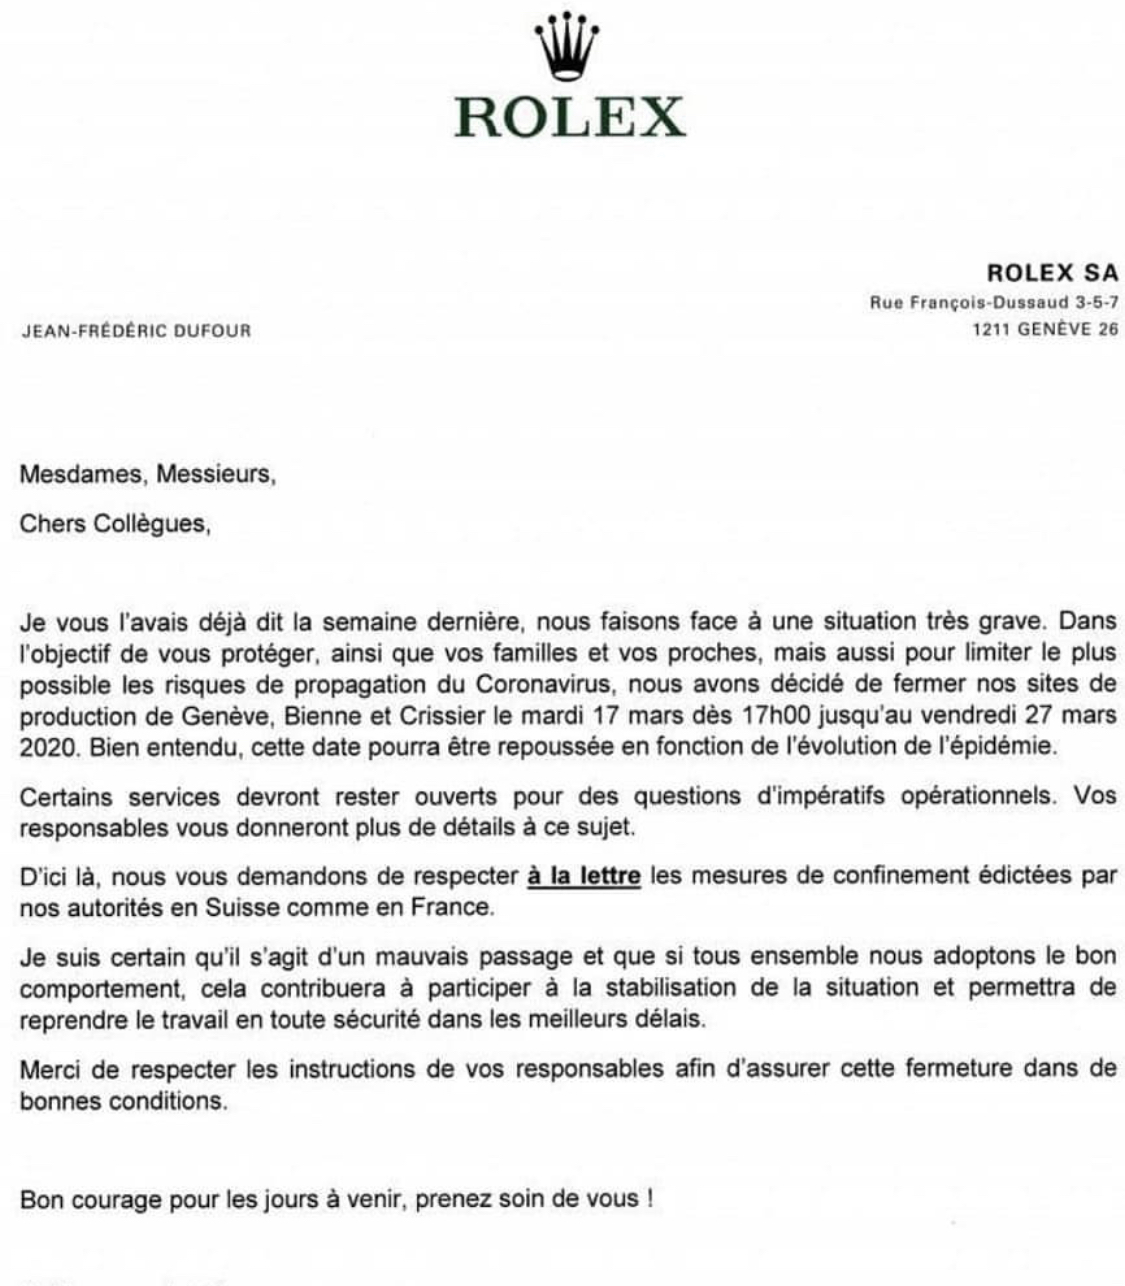 BREAKING NEWS: Rolex shuts down production for 10 days, closing three factories